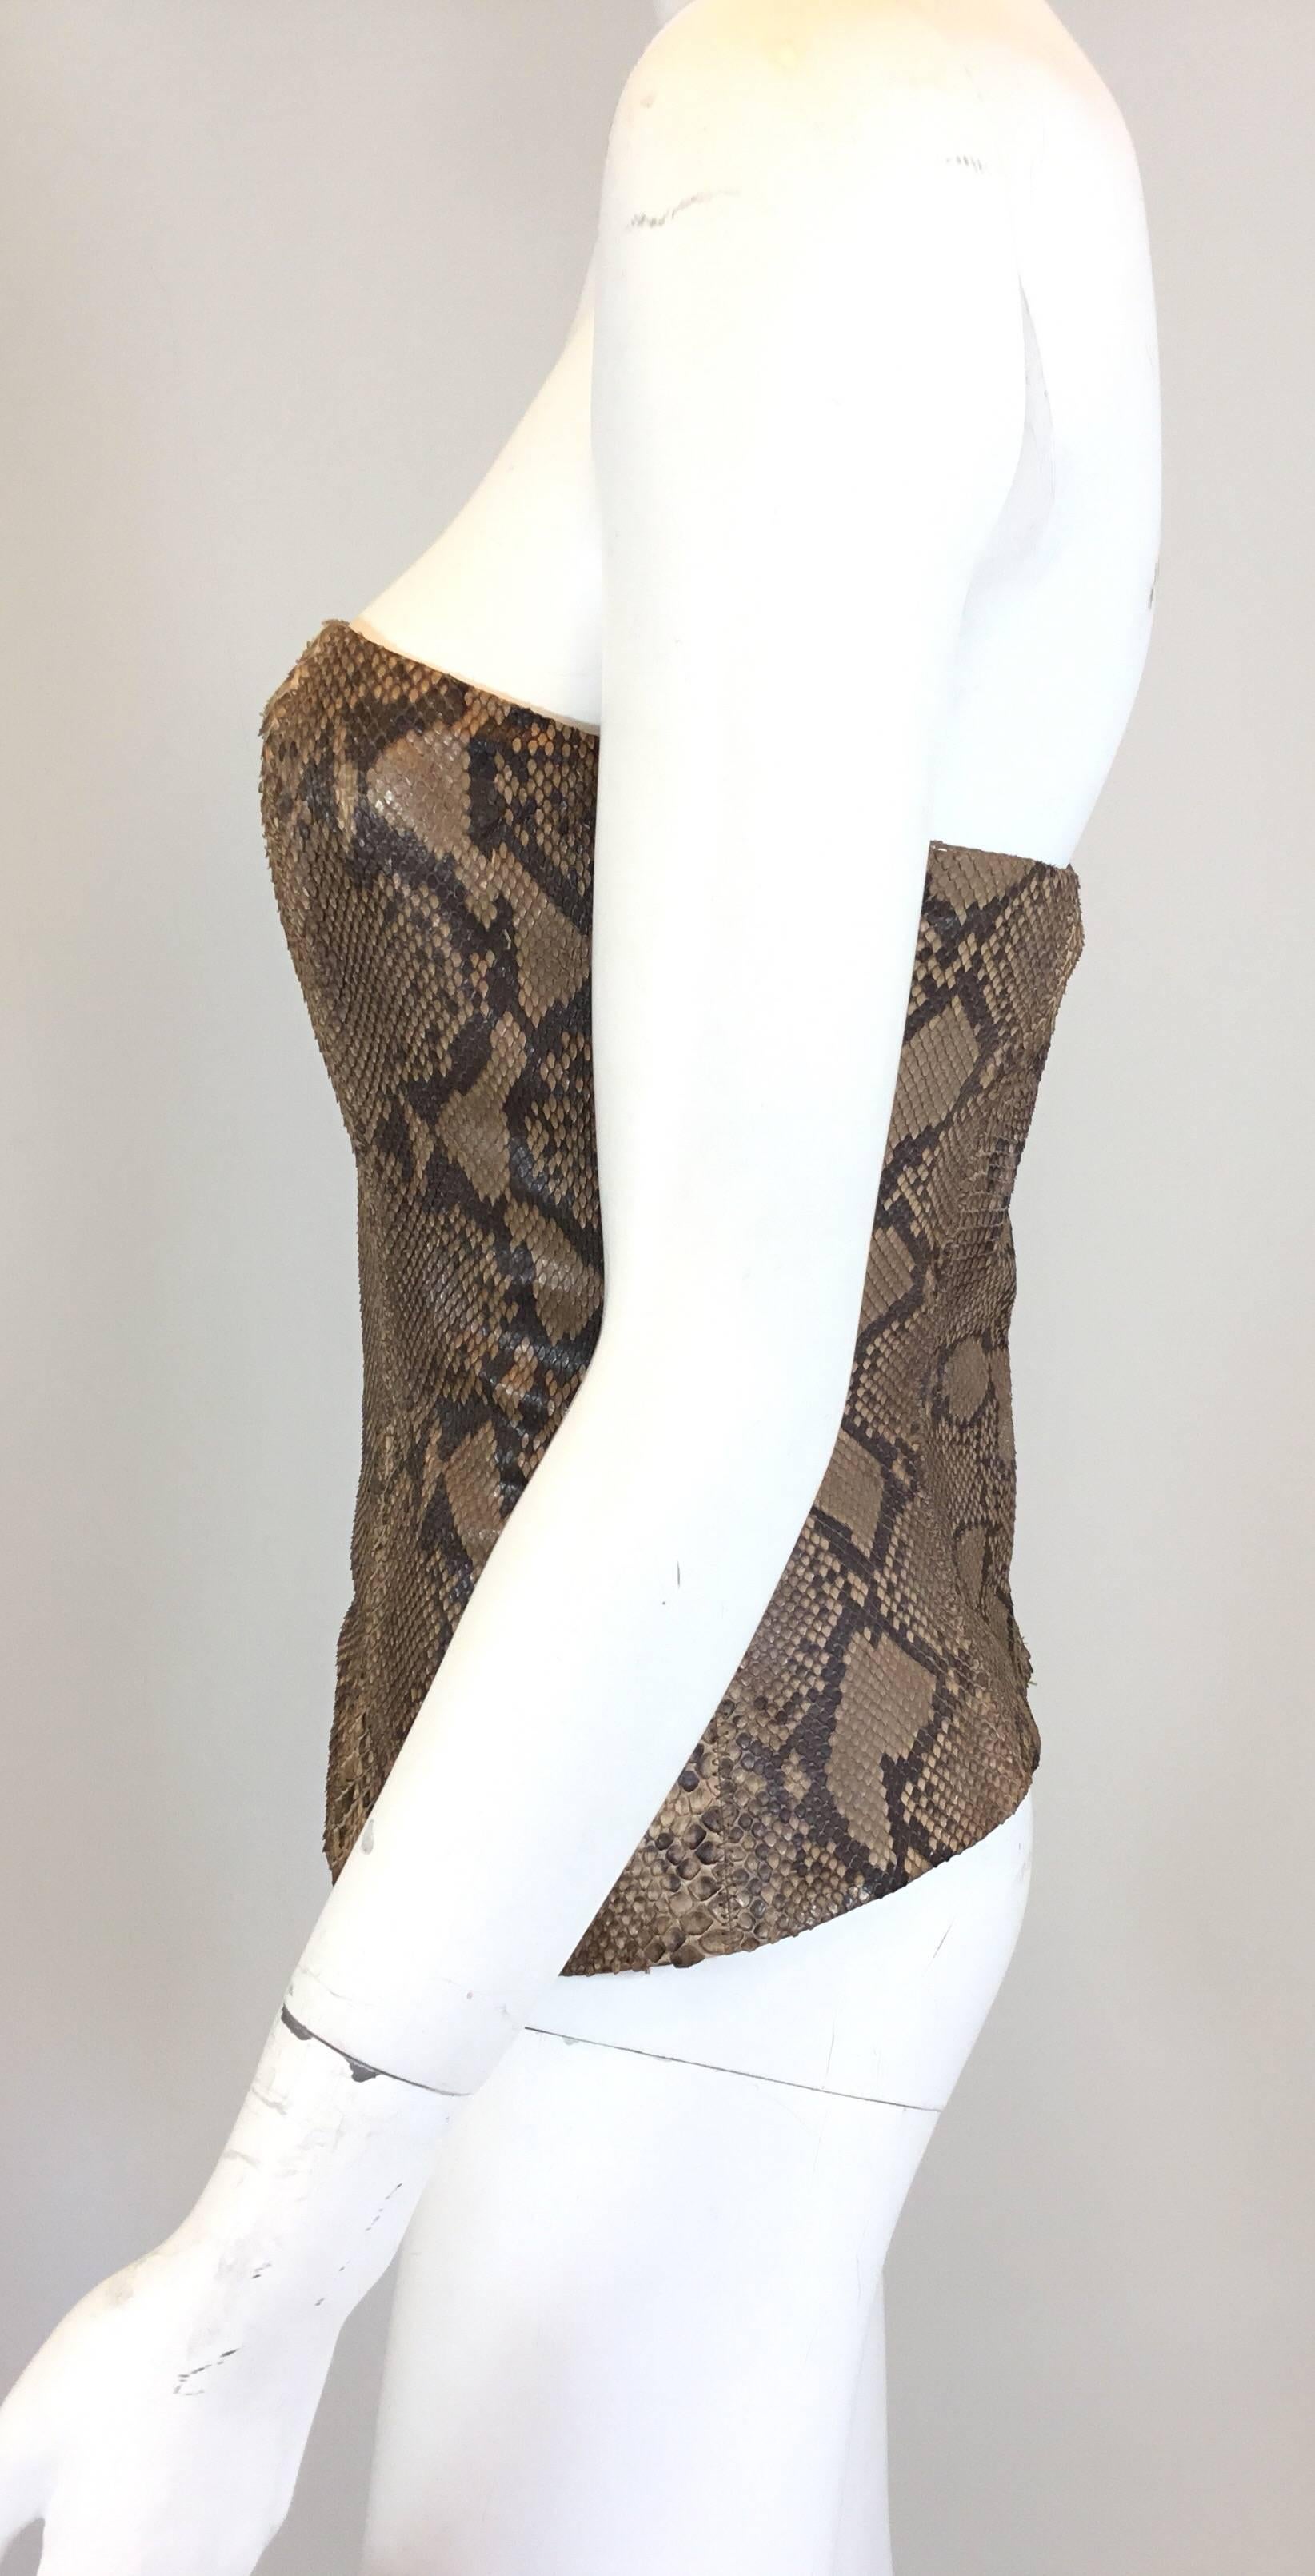 Roberto Cavalli snakeskin bustier strapless top in brown snake skin features a back zipper closure and is fully lined. Top is labeled a size 40/8. Cavalli 40 ia about a US 4/6. Measurements are as follows:

Bust- 33''
Waist- 28''
Length- 11.5''